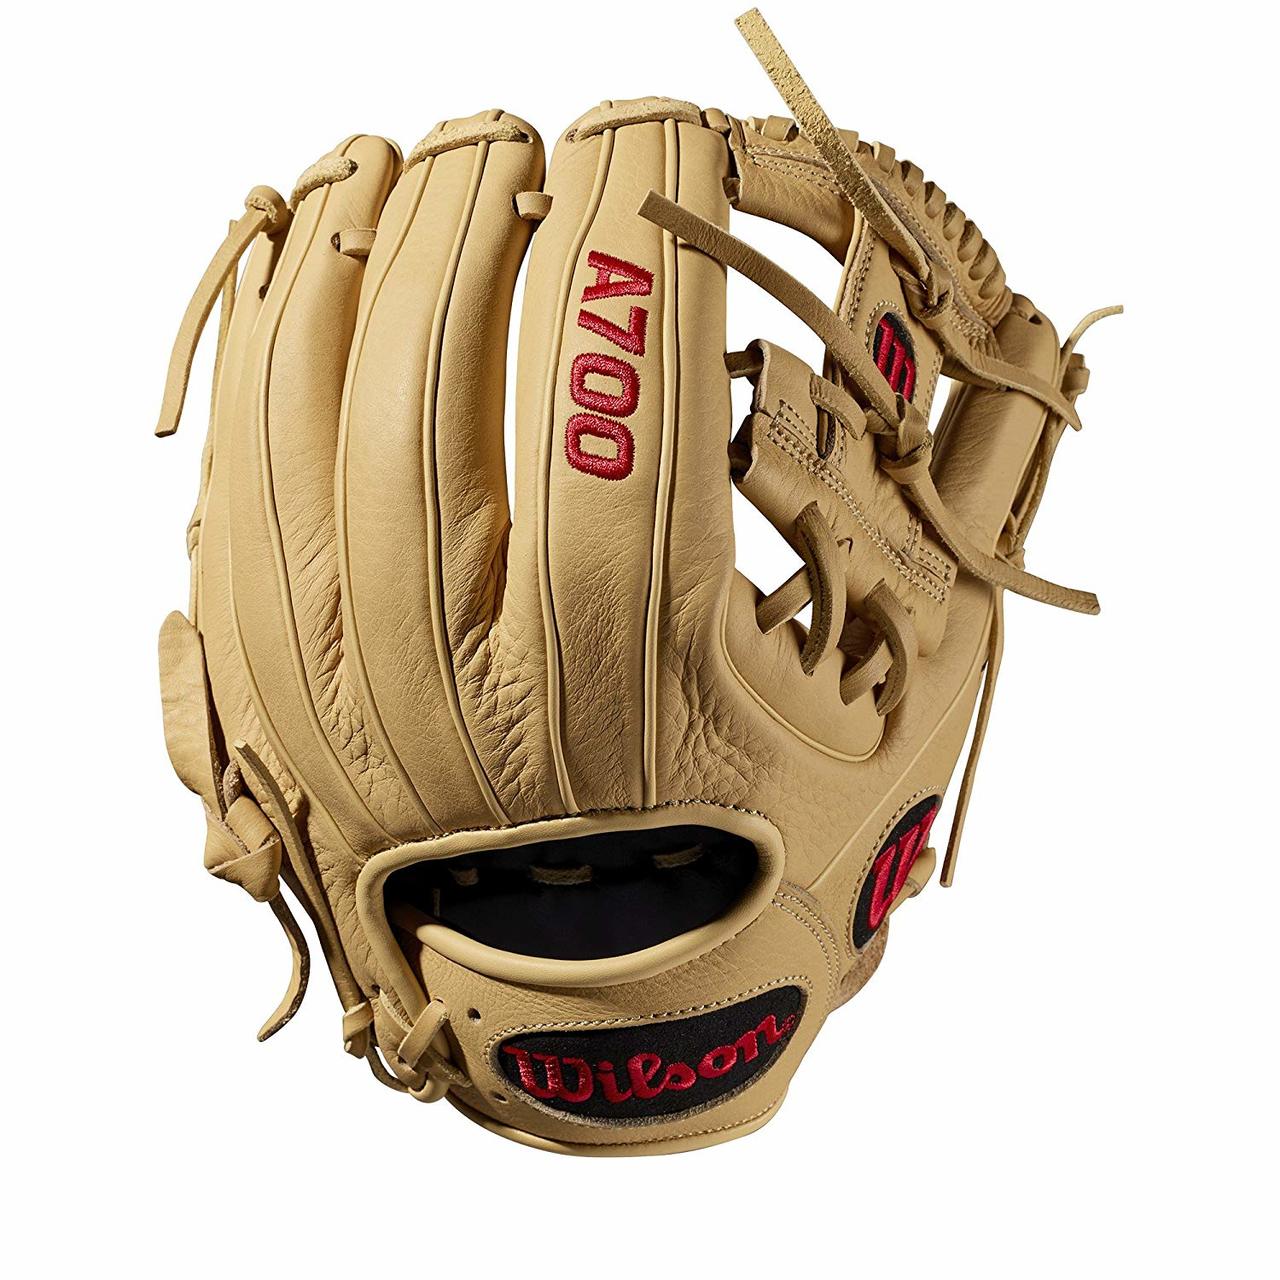 11.5 inch Baseball glove H-Web design Blonde Full-Grain leather. The all-new A700 line of Wilson gloves are the epitome of game-ready. Designed with soft, full grain cowhide leather, this Blonde 11.25 I -Web model gives you the perfect feel without the added bulk of other gloves. - 11.25 Inch Model - I Web - Blonde Full-Grain Leather - Game Ready Break-In.